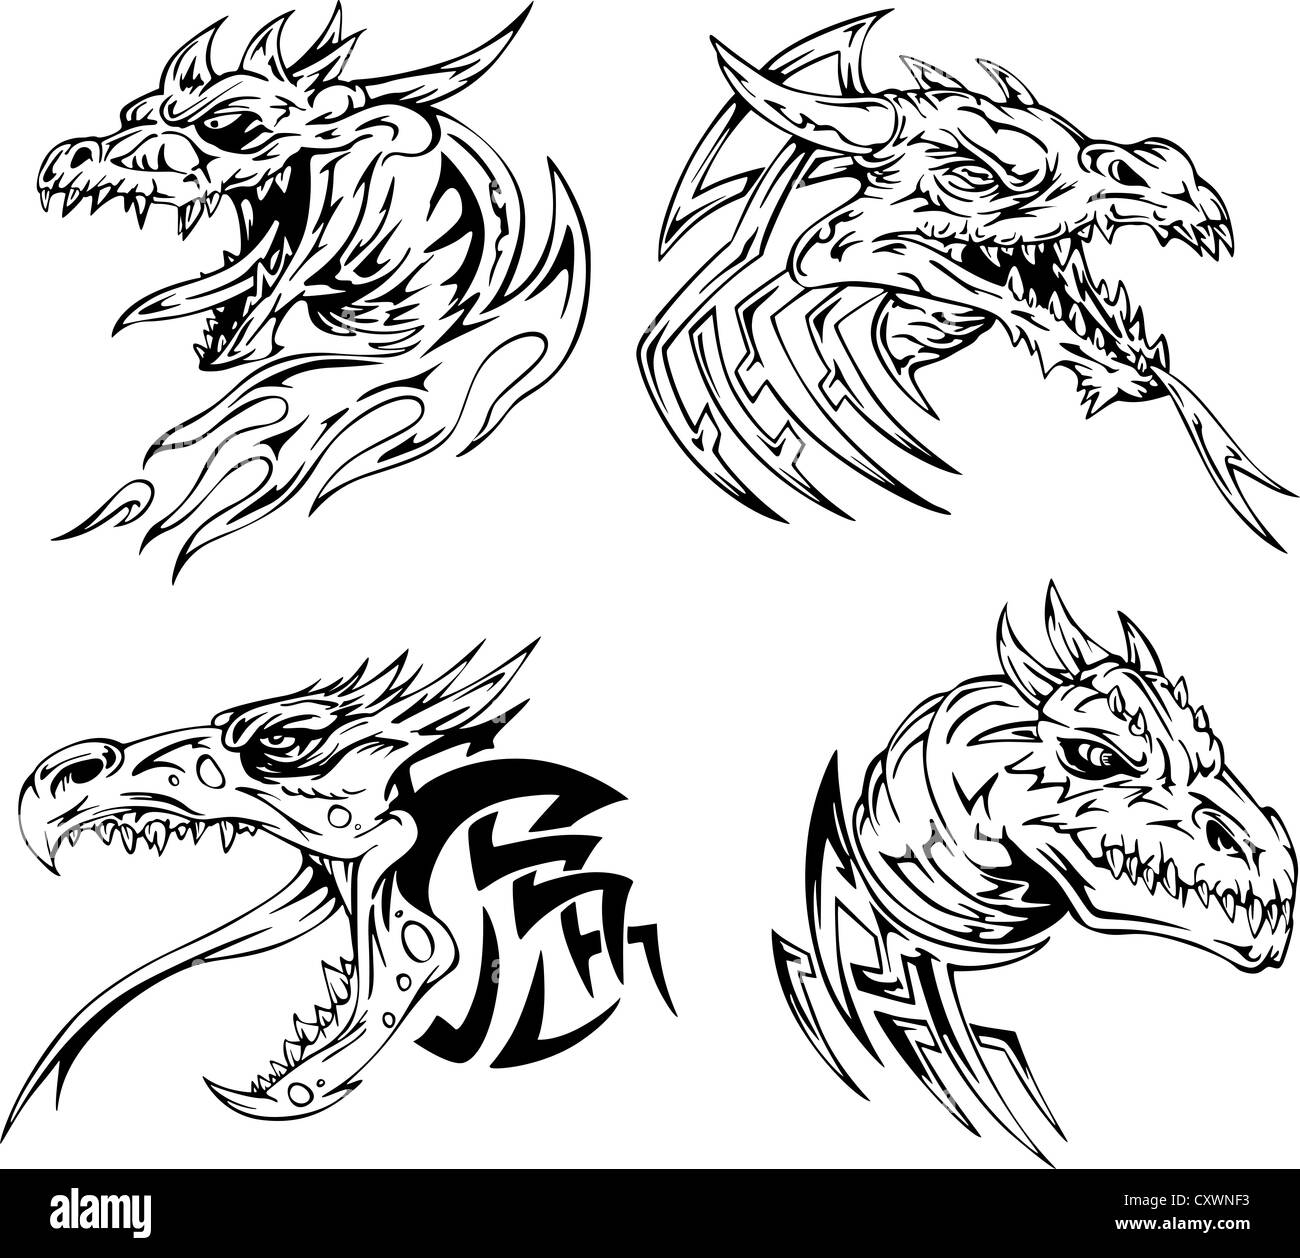 Dragon head tattoos. Set of black and white vector illustrations. Stock Photo